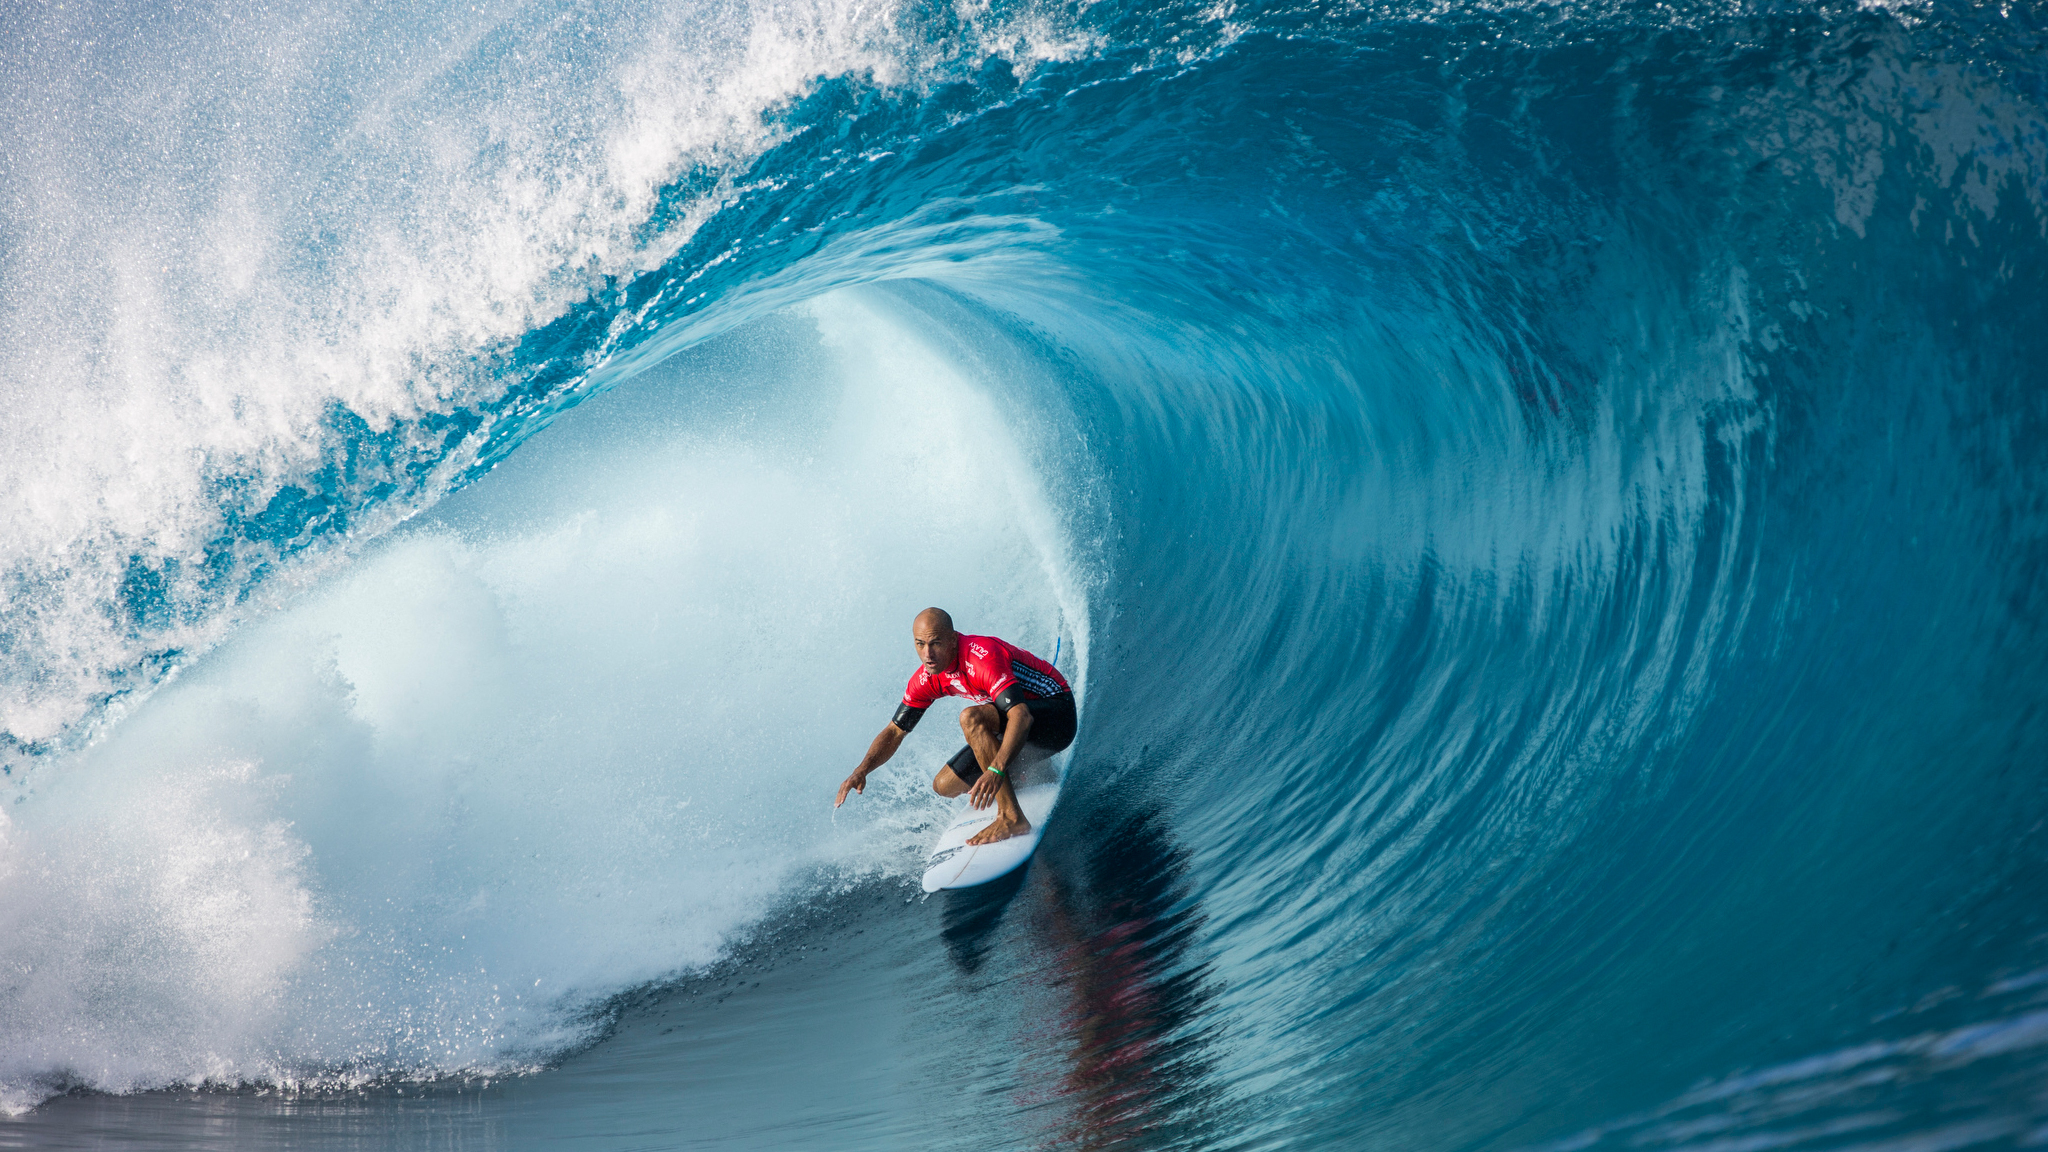 Billabong Pro Teahupoo Opens In Perfect Surf